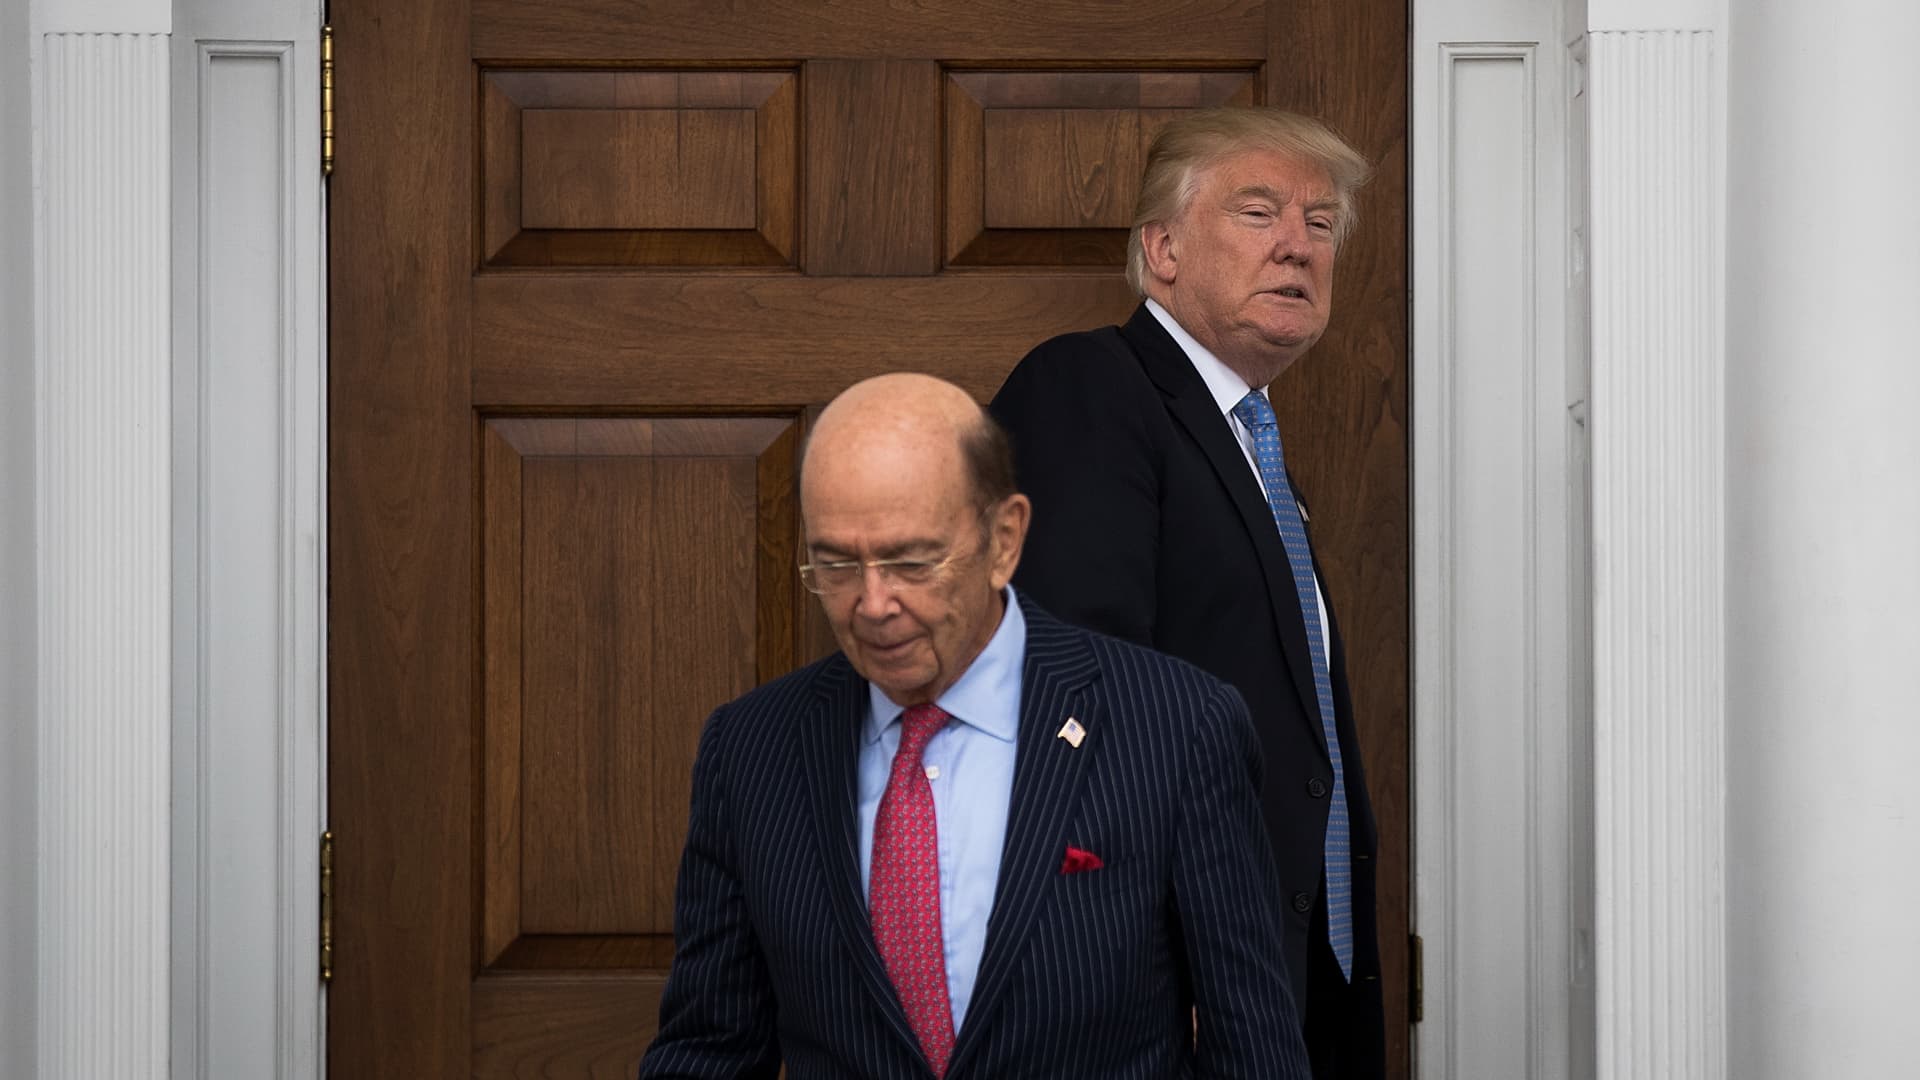 Trump is telling people he wants to replace Commerce Secretary Wilbur Ross by the end of the year